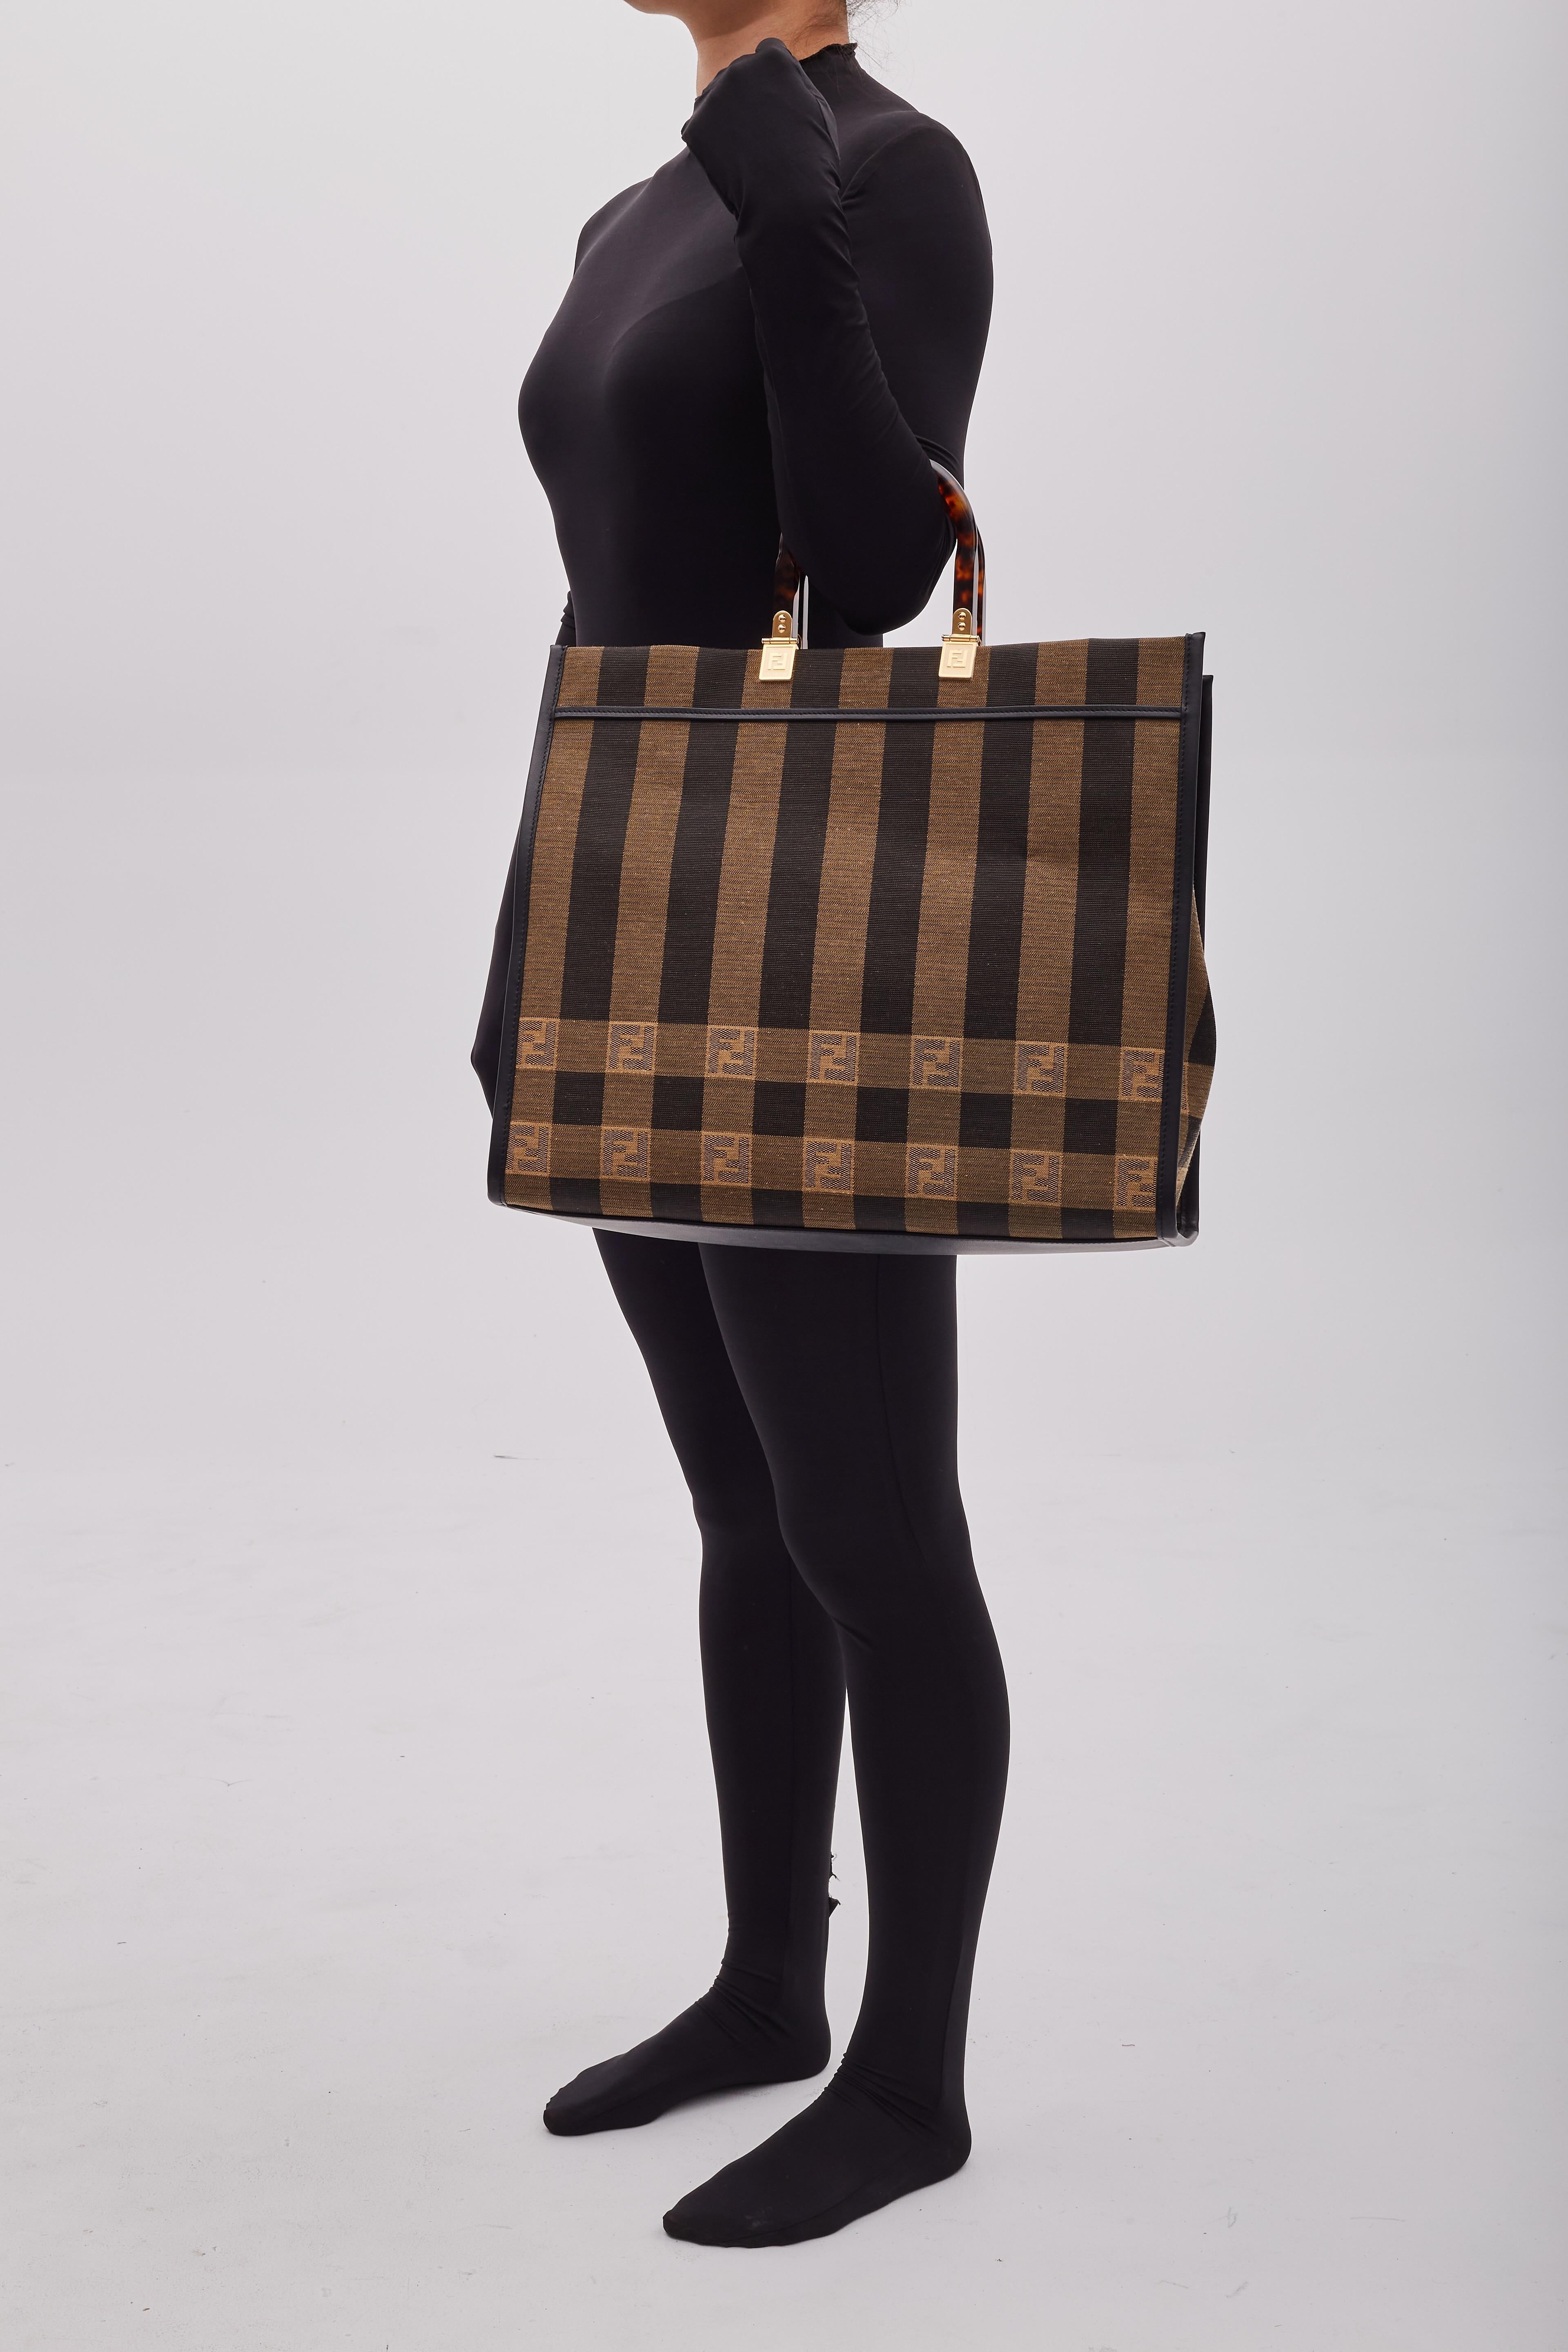 This Fendi shopping tote is made of gingham jacquard striped fabric with black leather trim. The bag features resin tortoiseshell top handles, gold hardware, an open top, and a spacious interior with a zipper pocket.

Color: Tobacco black /